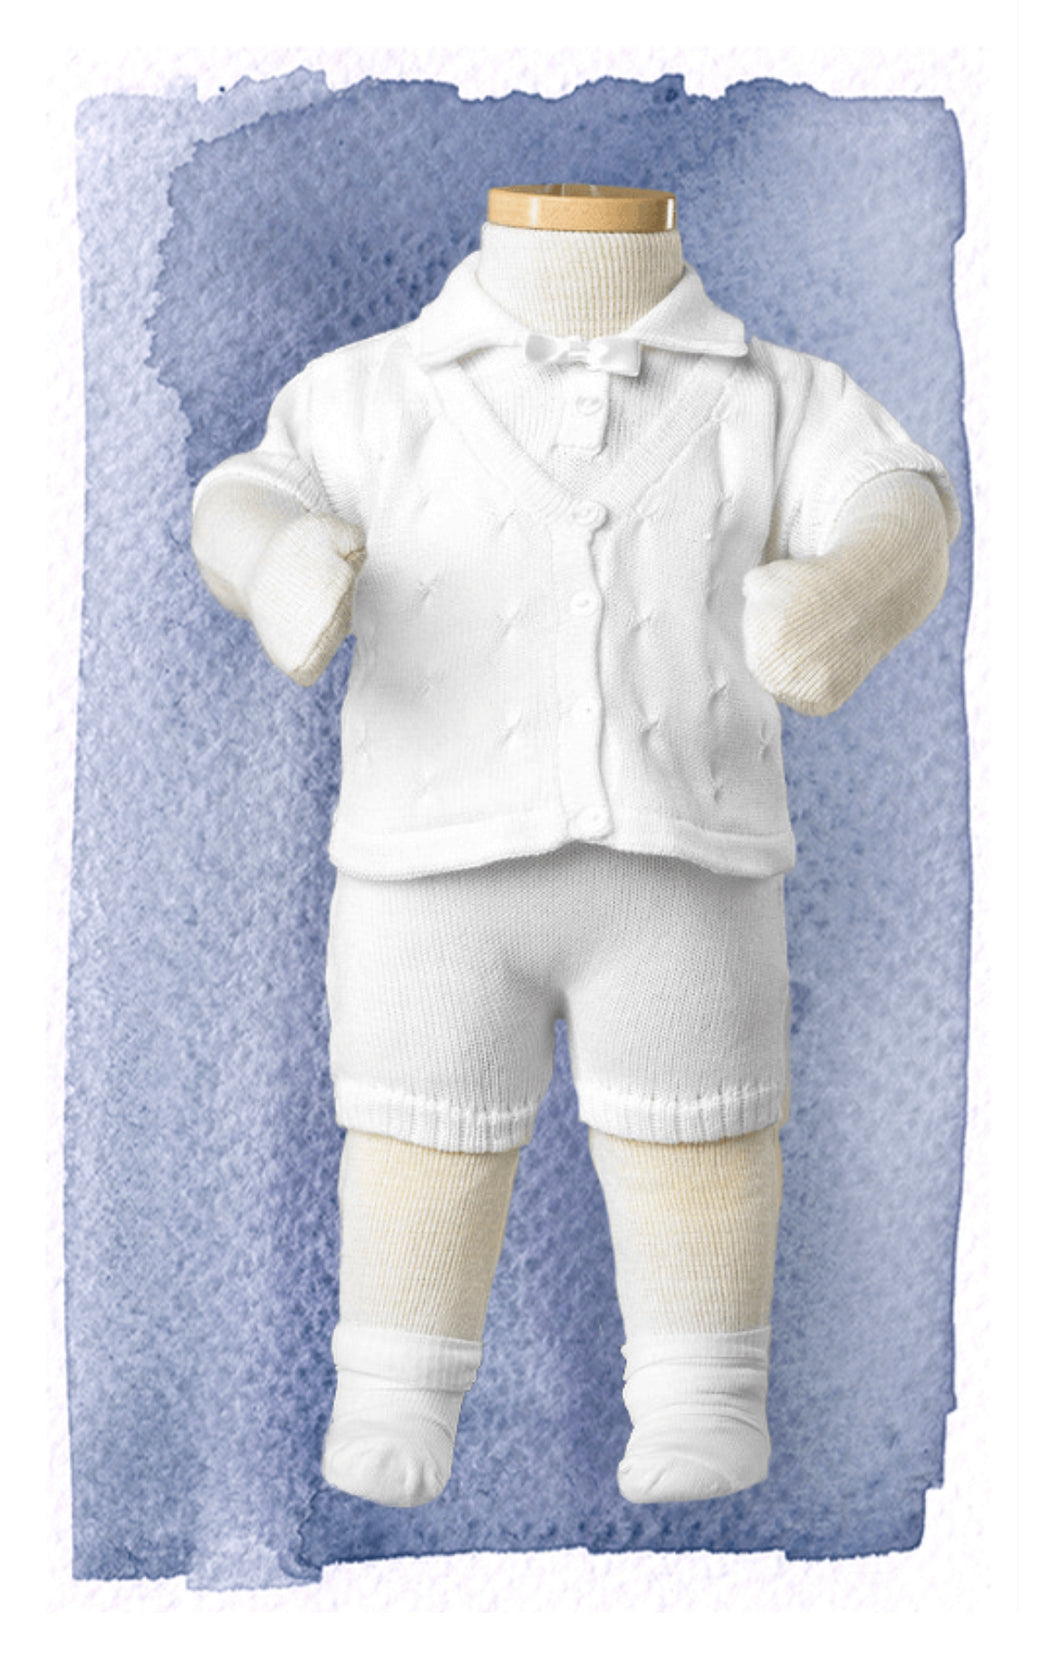 Cuddle Up Baby Boy Blessing Outfit